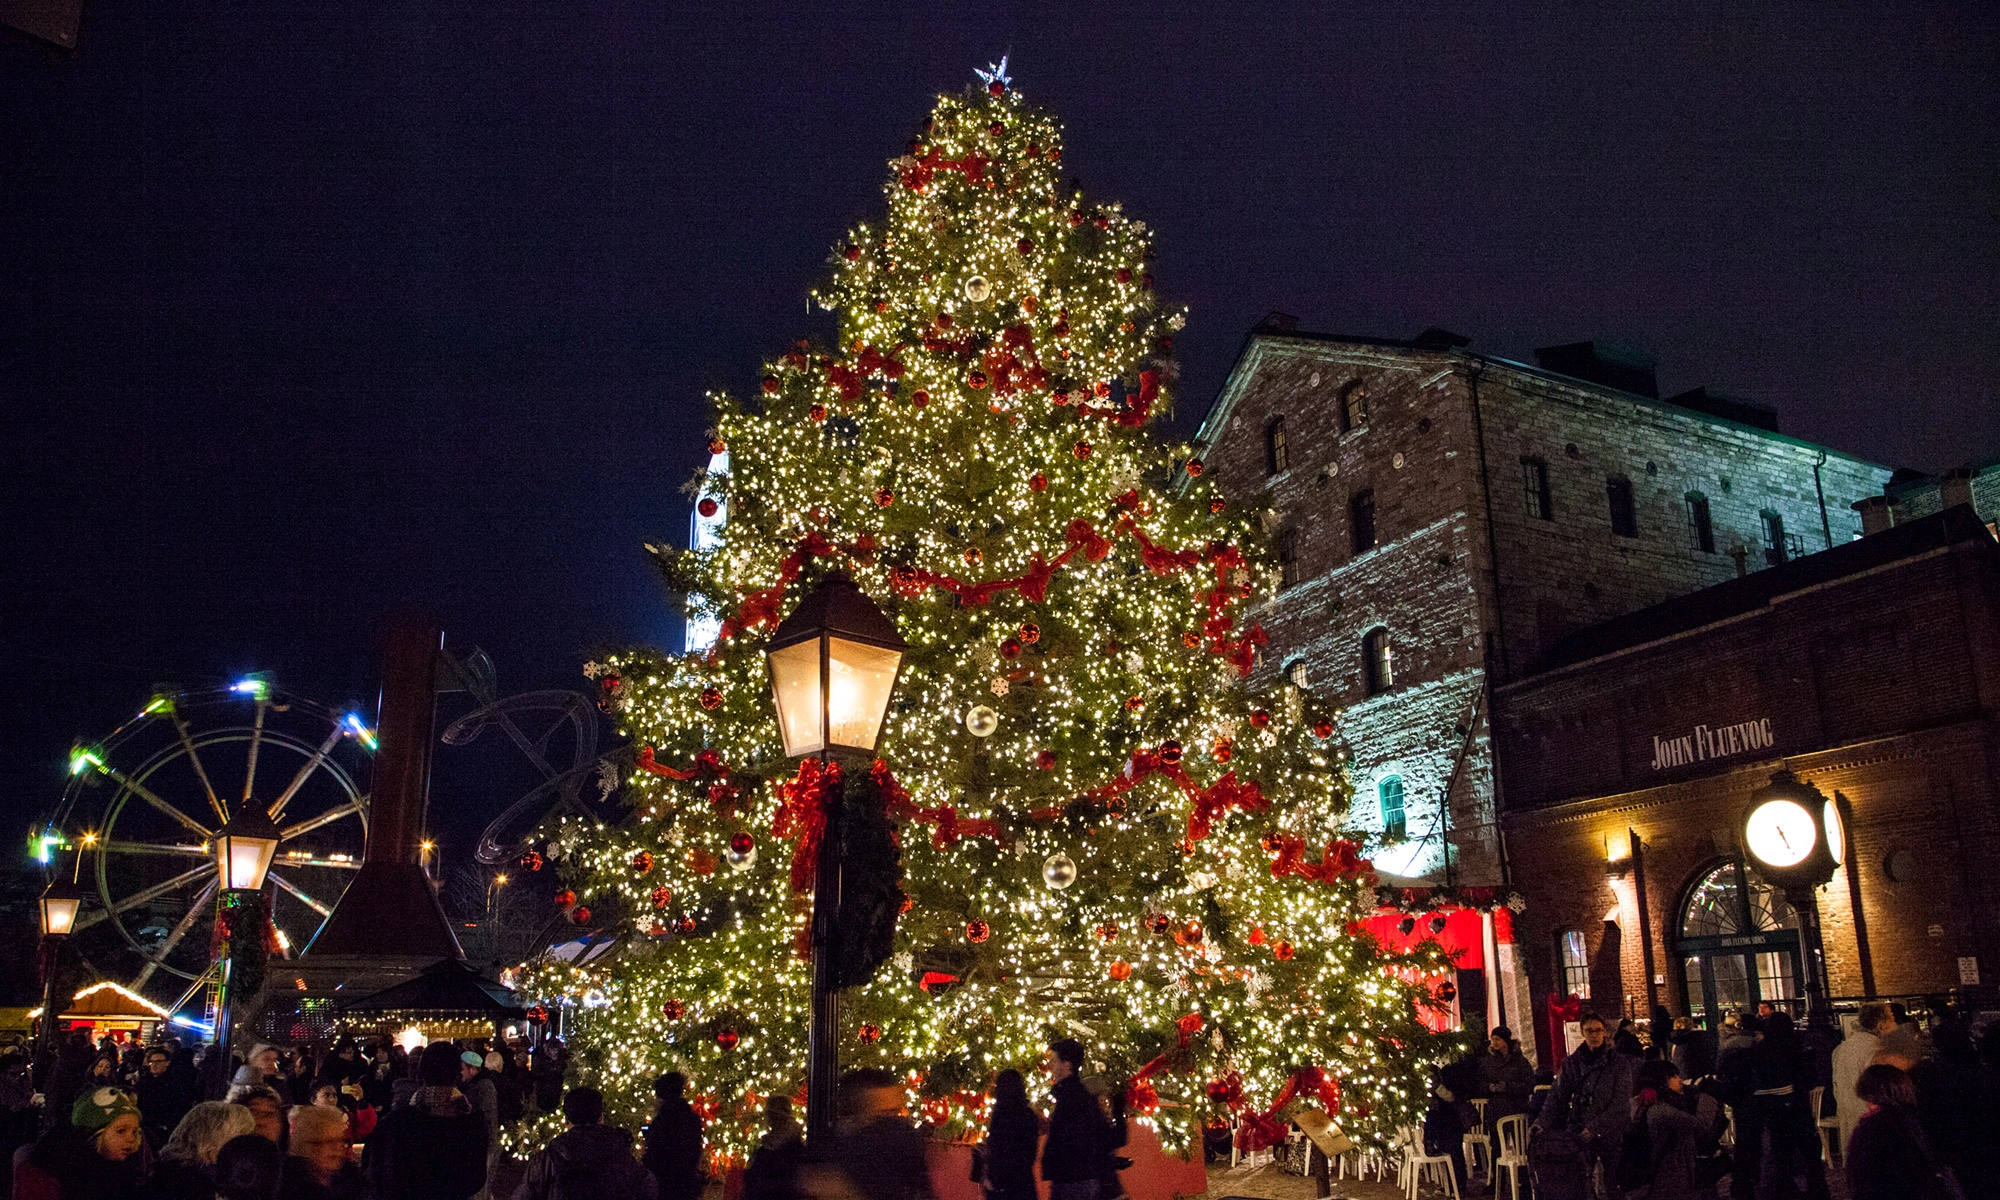 Festive Holiday Activities in Toronto for Friends and Family